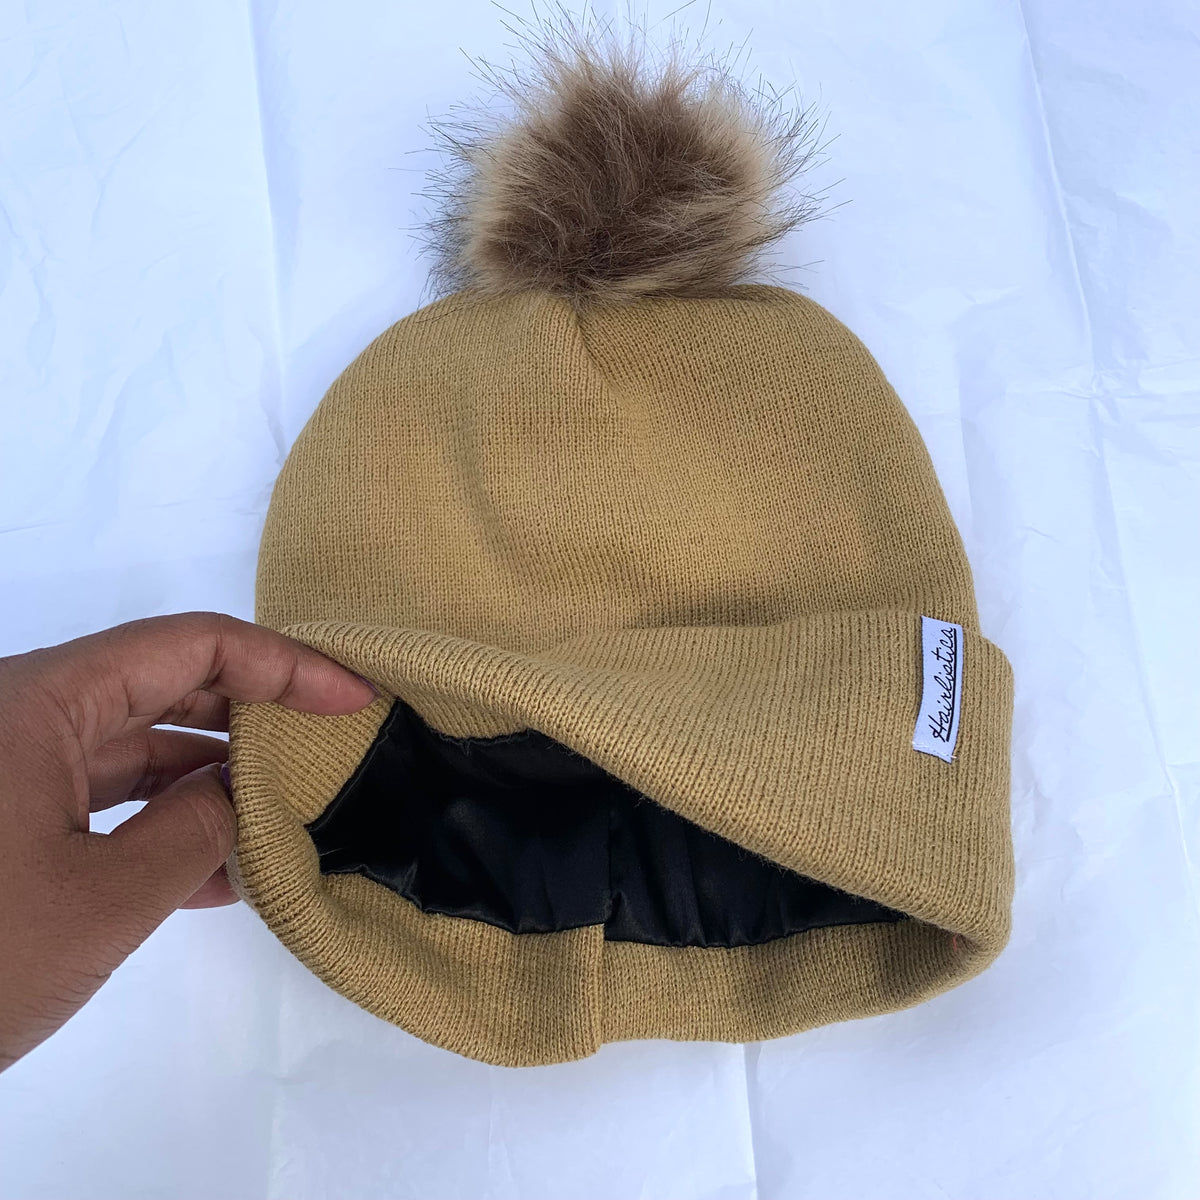 Satin lined beanie - Beige Pompom with – Hairlistica